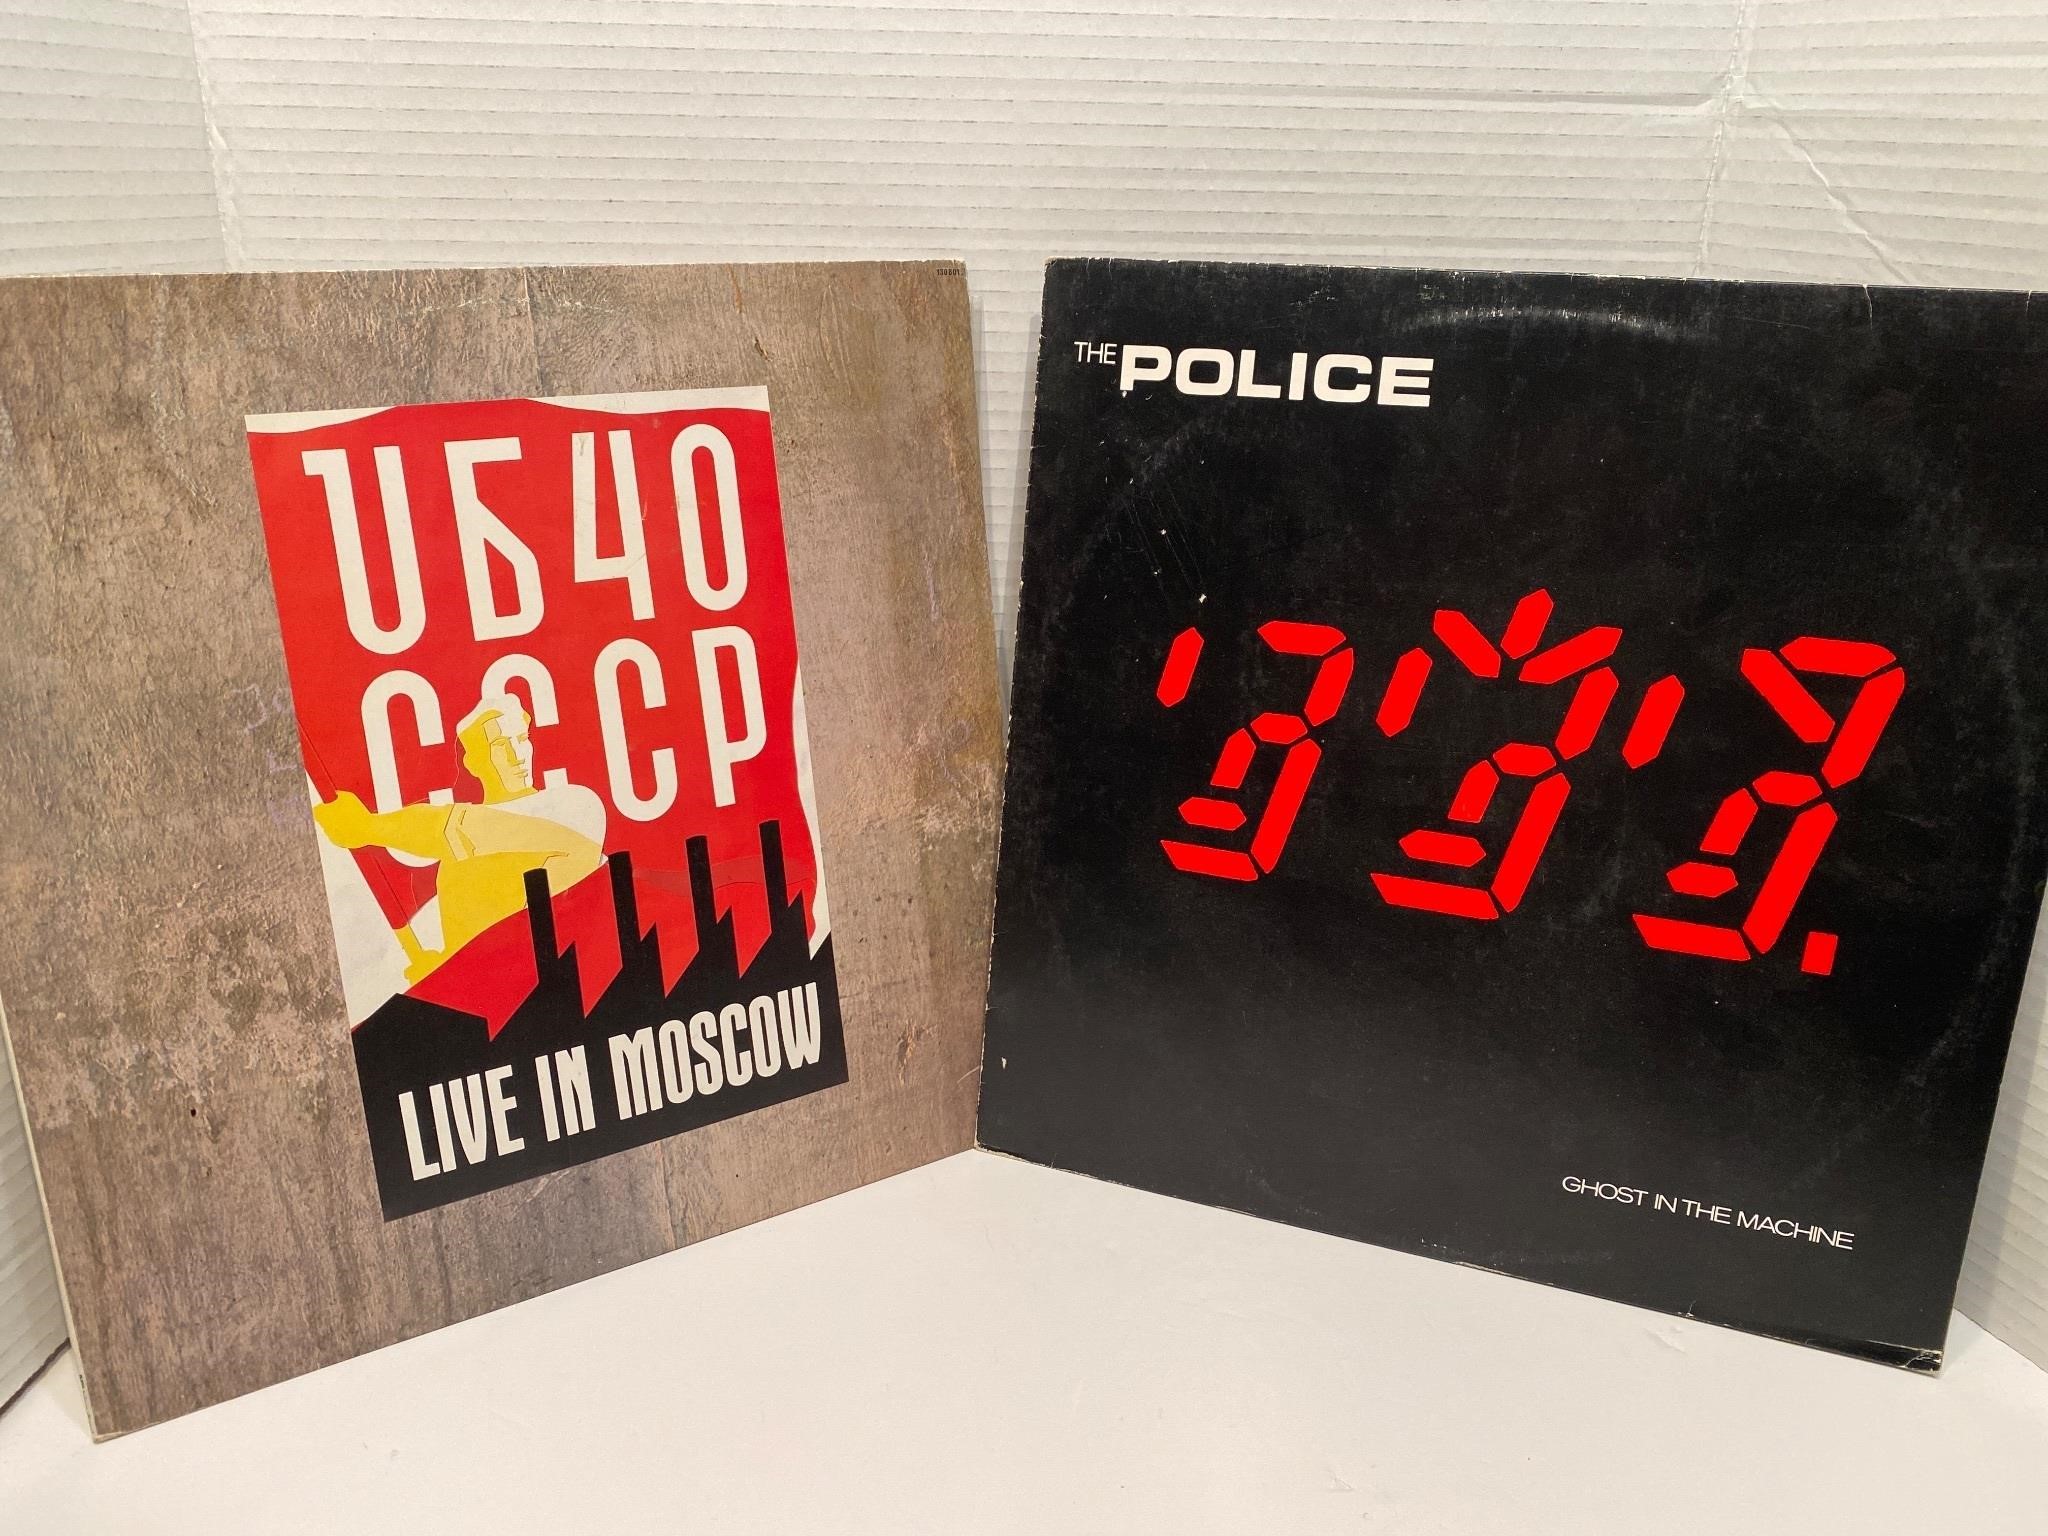 UB-40 and the Police Vinyl LP